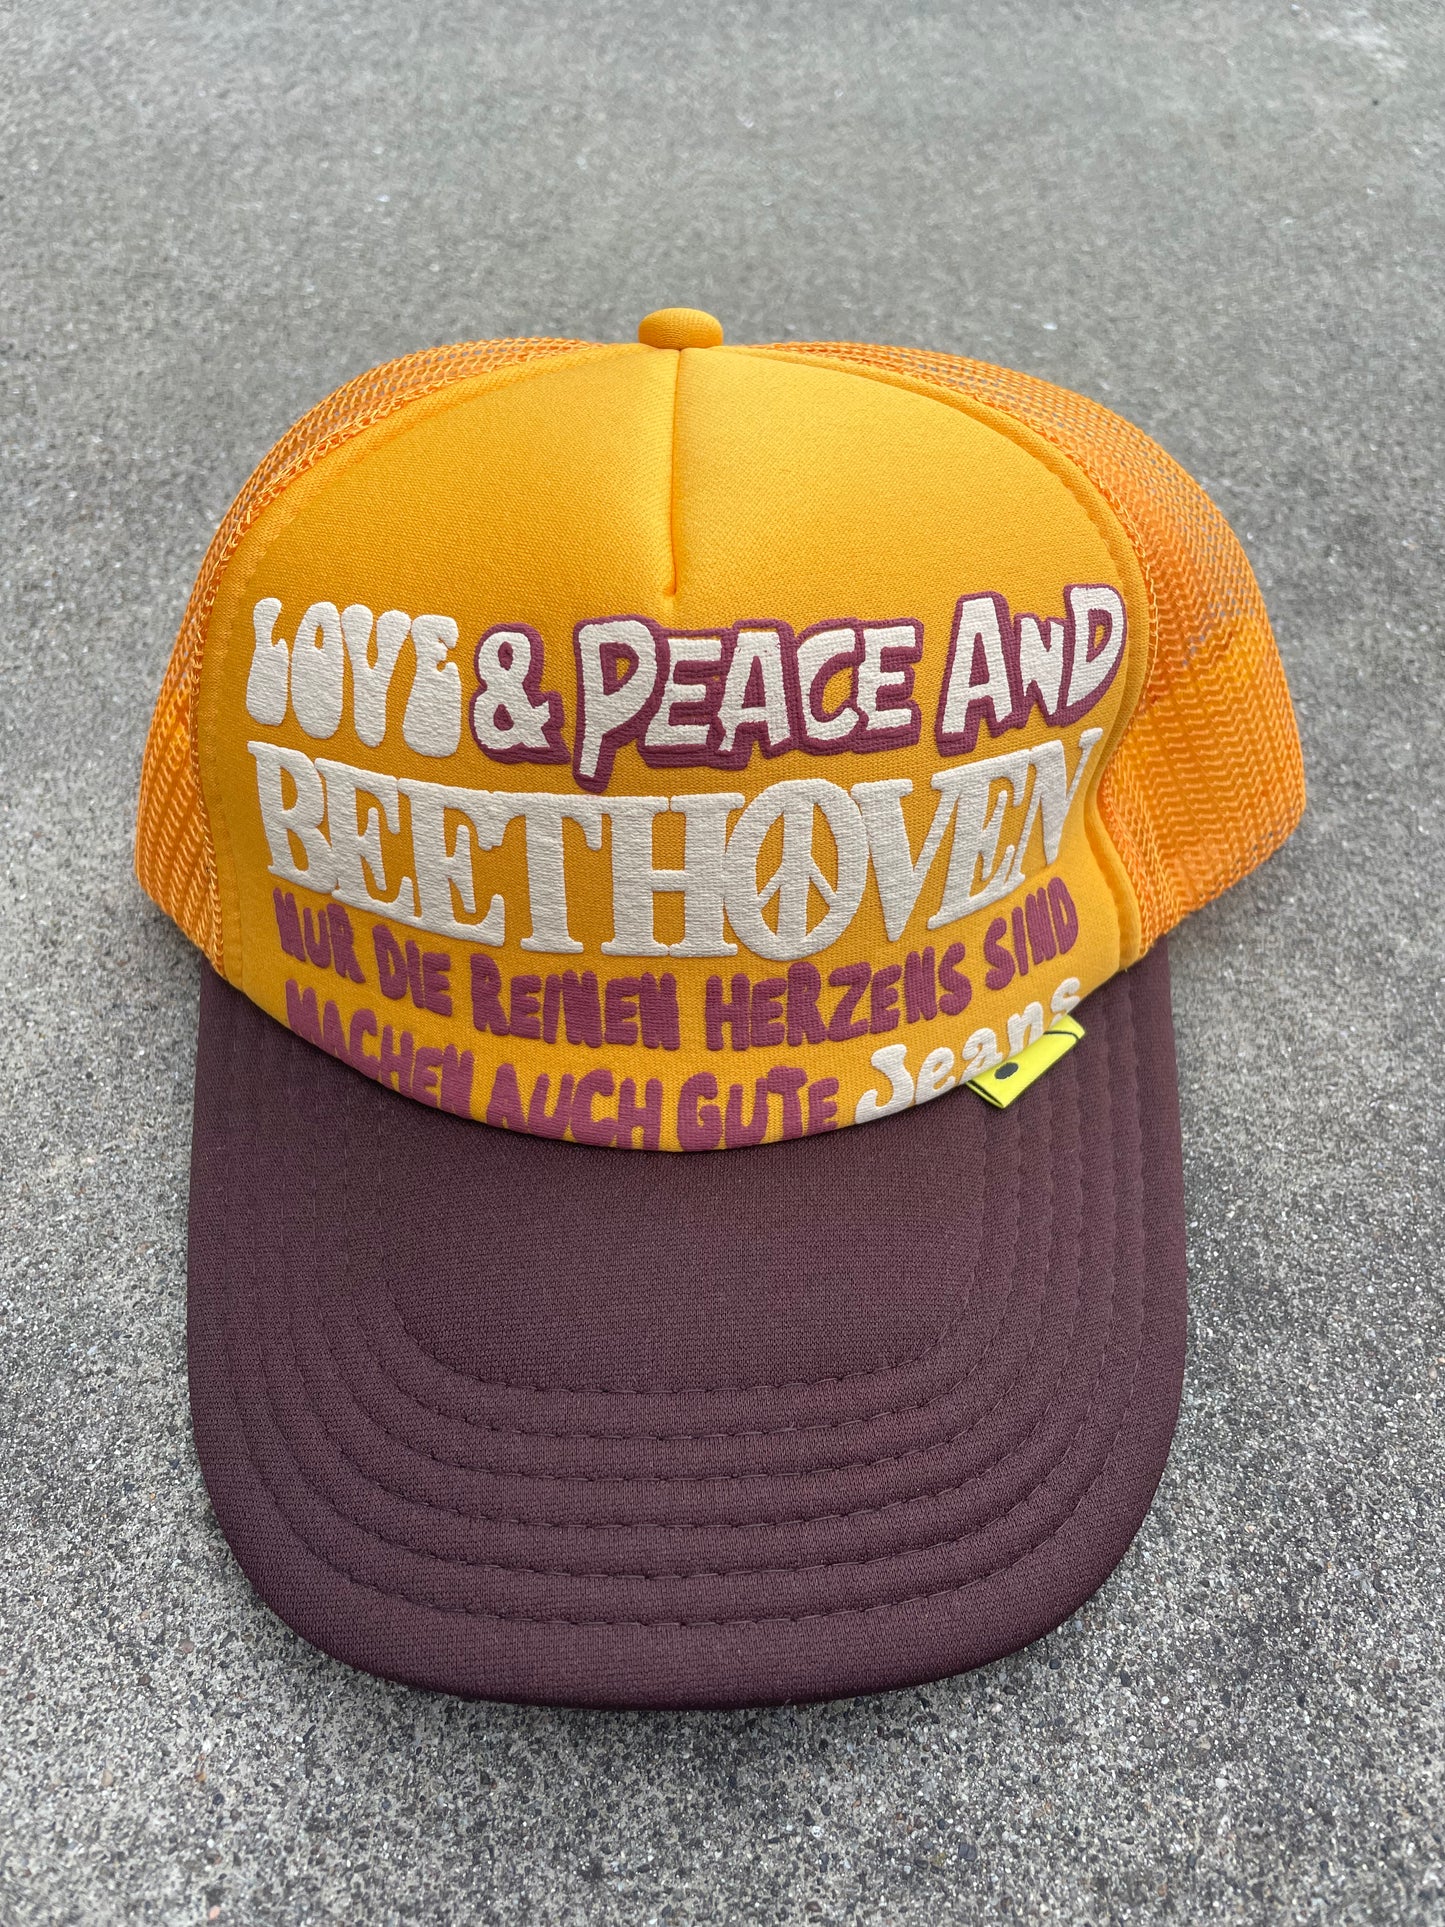 Kapital Kountry Love and Peace and Beethoven Yellow Trucker Hat